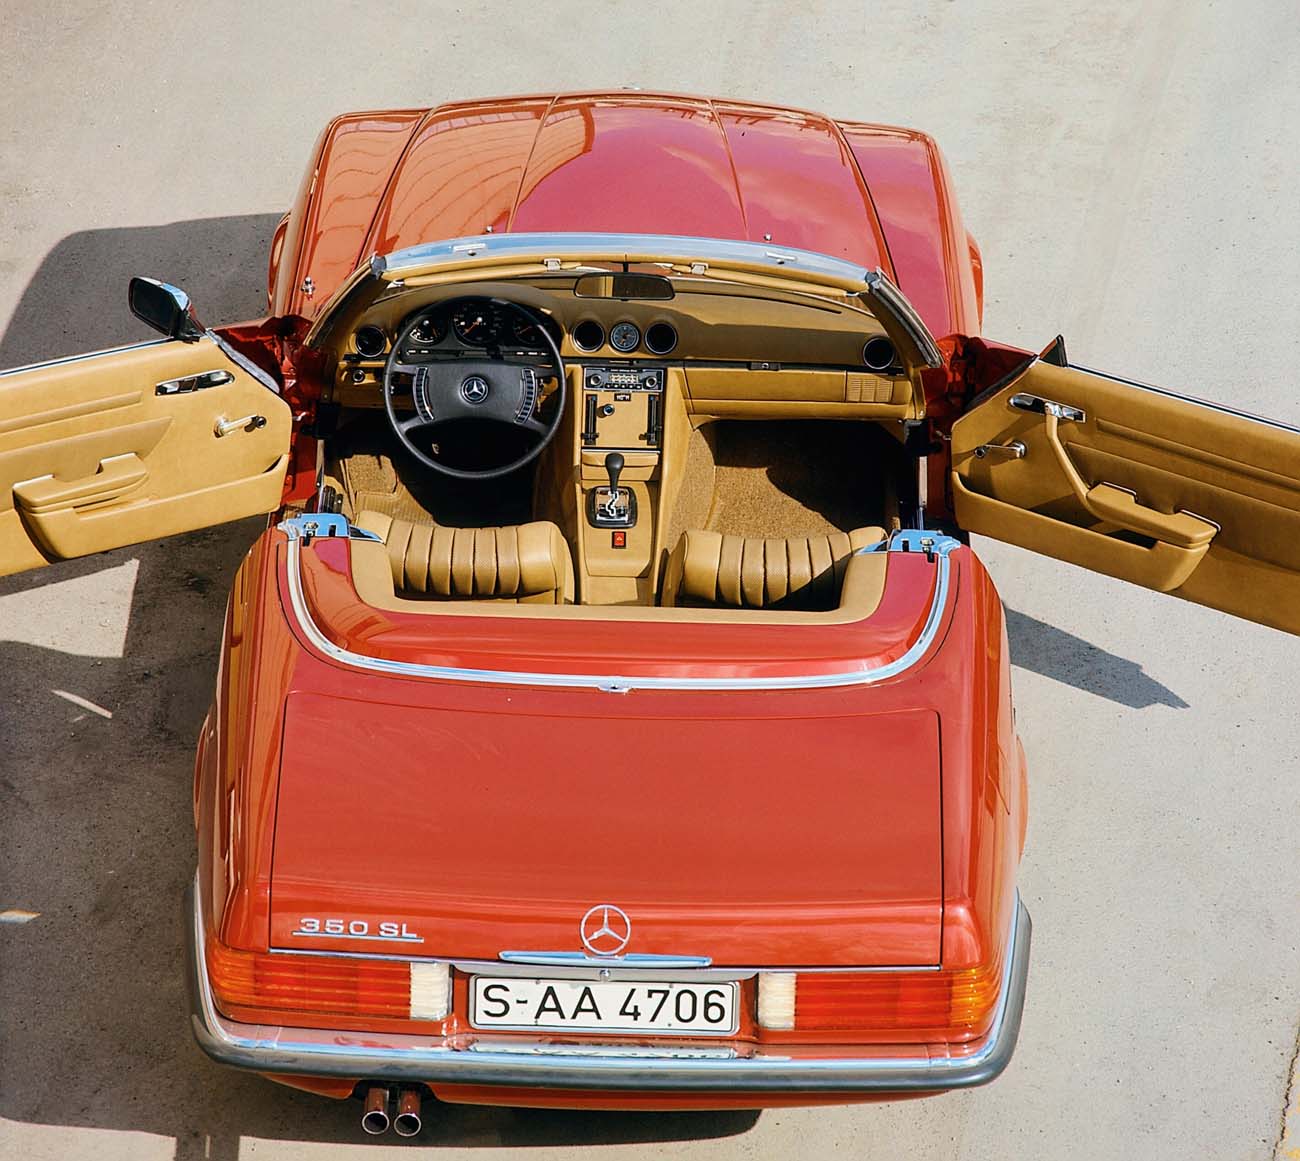 Mercedes-Benz SL of the R 107 model series: Premiere 50 years ago in April 1971